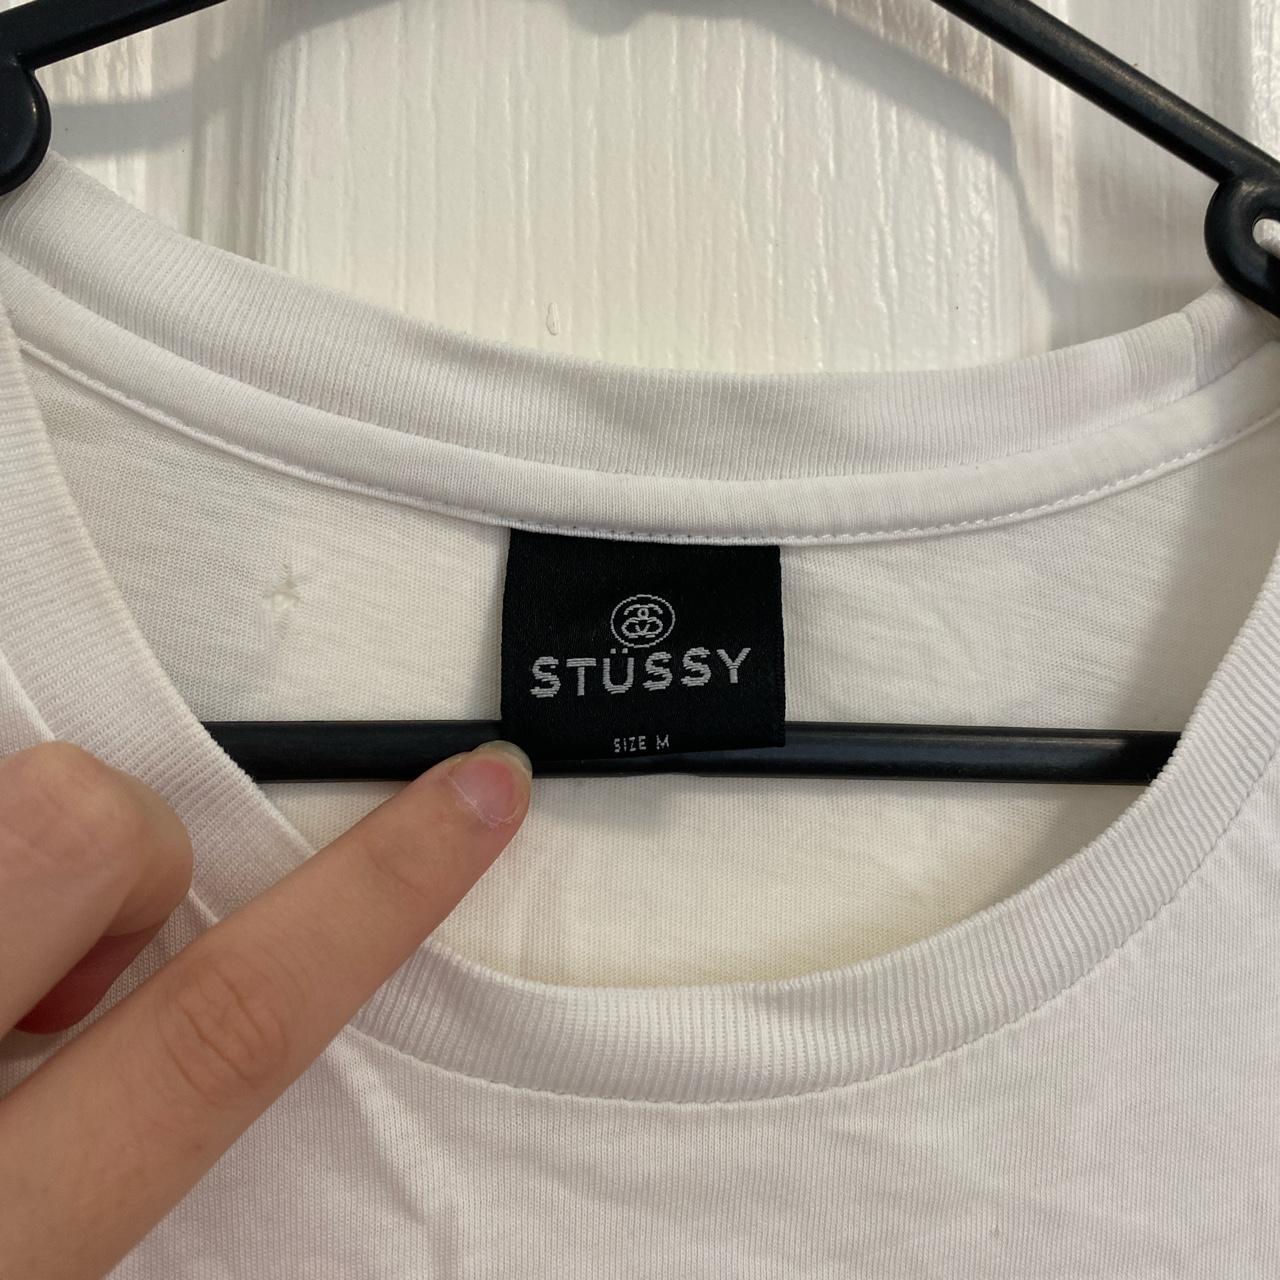 STUSSY 1980 Men’s Tee Size: M Bought from Glue... - Depop